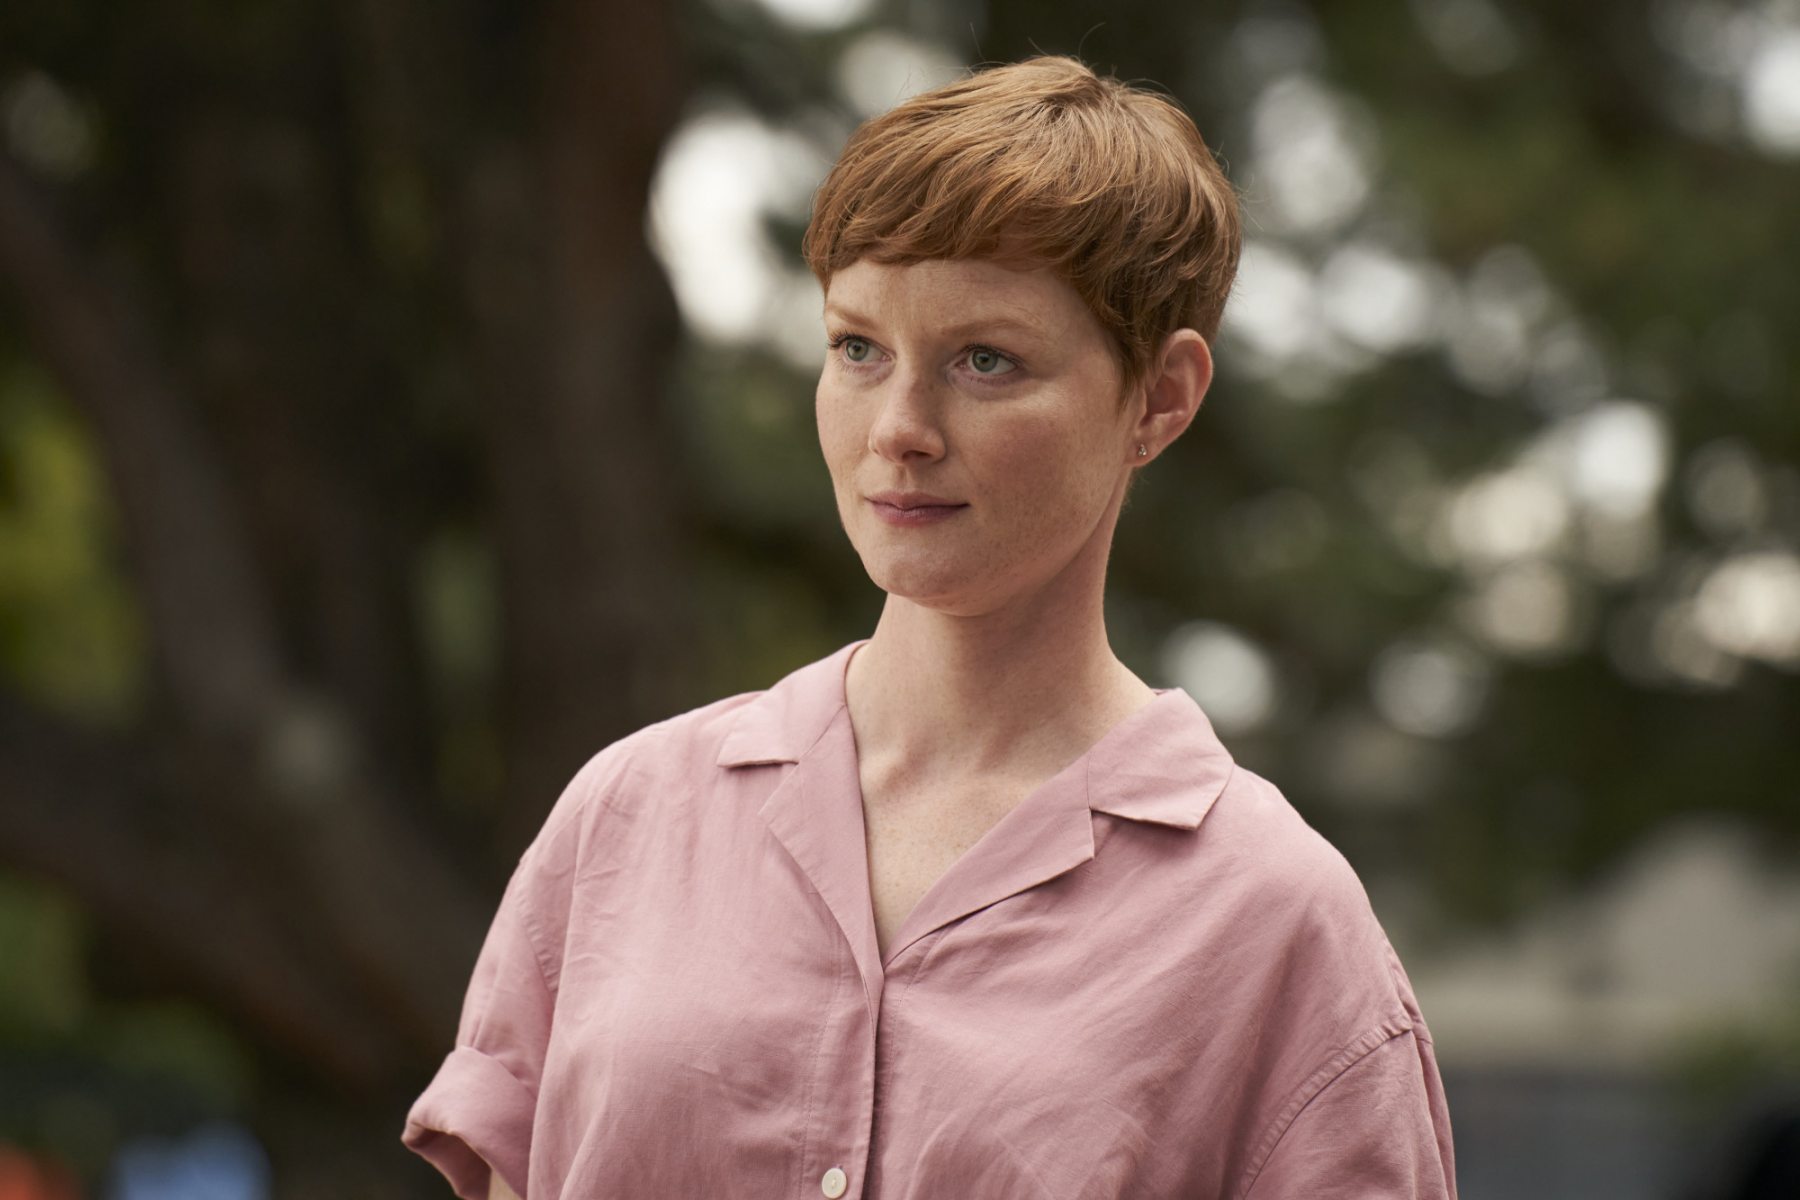 ACCUSED: Wrenn Schmidt in the “Jack’s Story” episode of ACCUSED airing Tuesday, March. 21 (9:01-10:00 PM ET/PT) on FOX. ©2023 Fox Media LLC. CR: Steve Wilkie/FOX